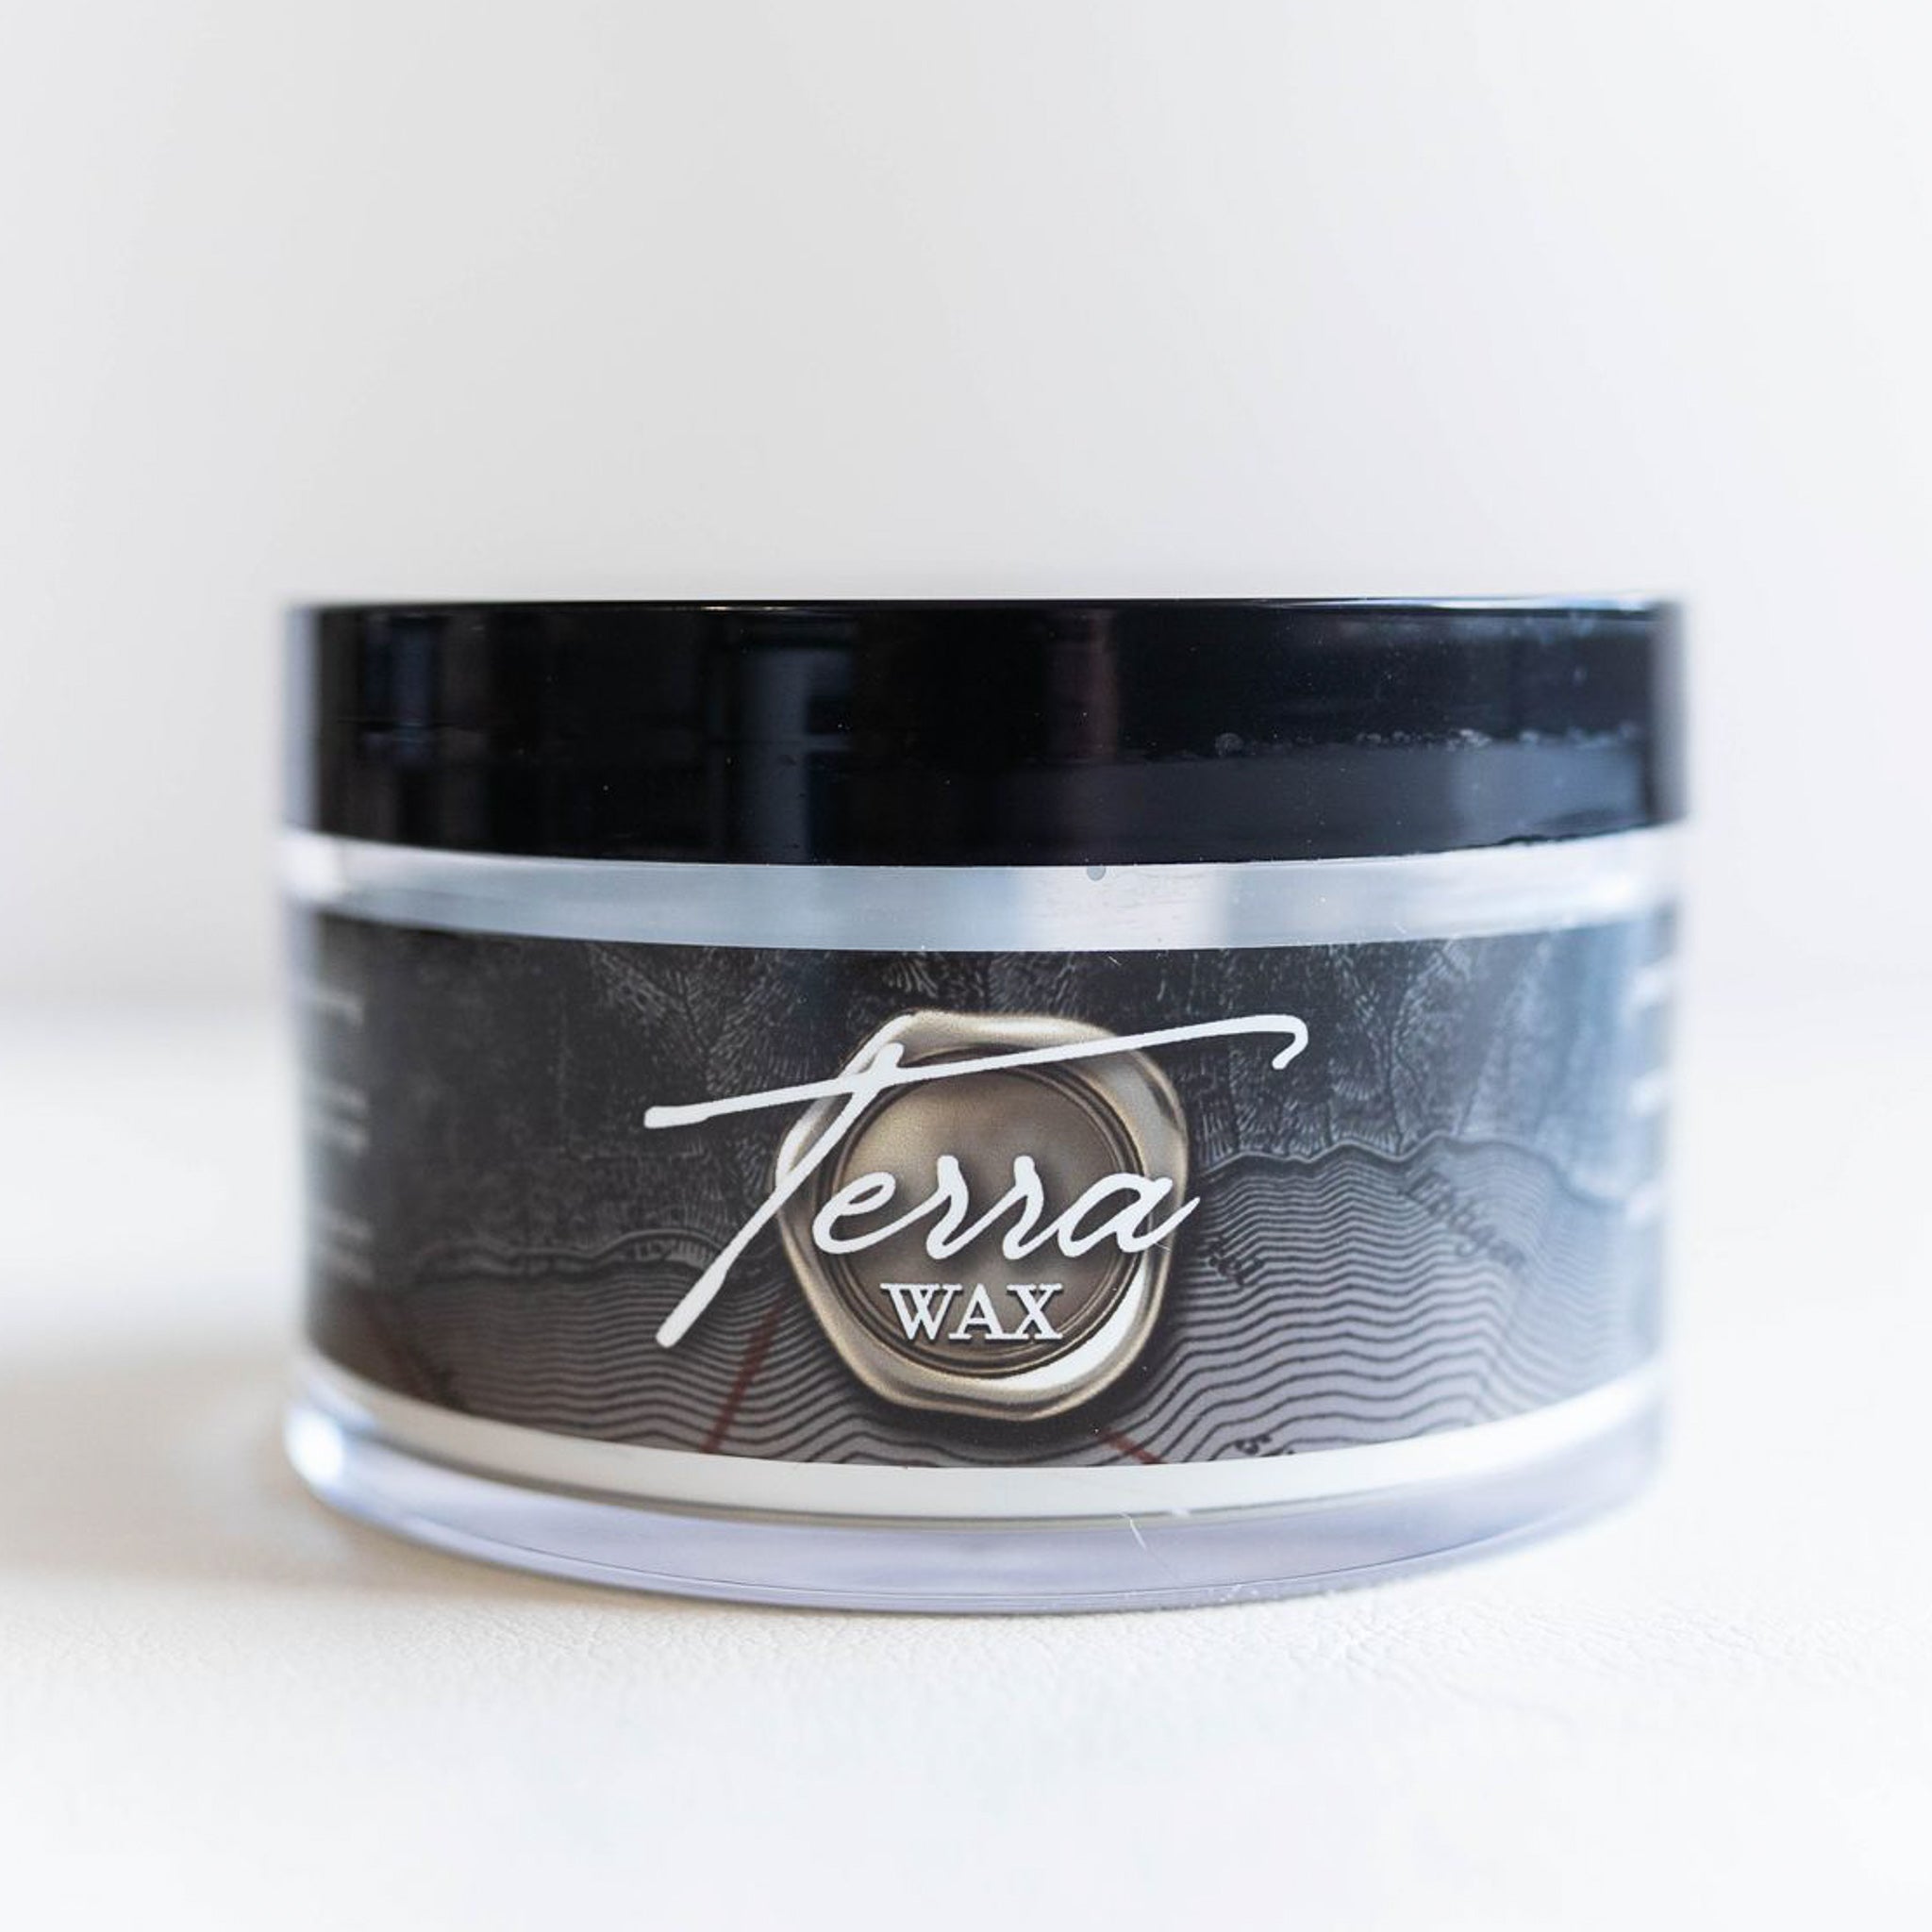 A container of Dixie Belle's Terra Wax is against a white background. This wax is perfect for providing a rock-hard finish  that will preserve your details instead of making them blurry or flattened.